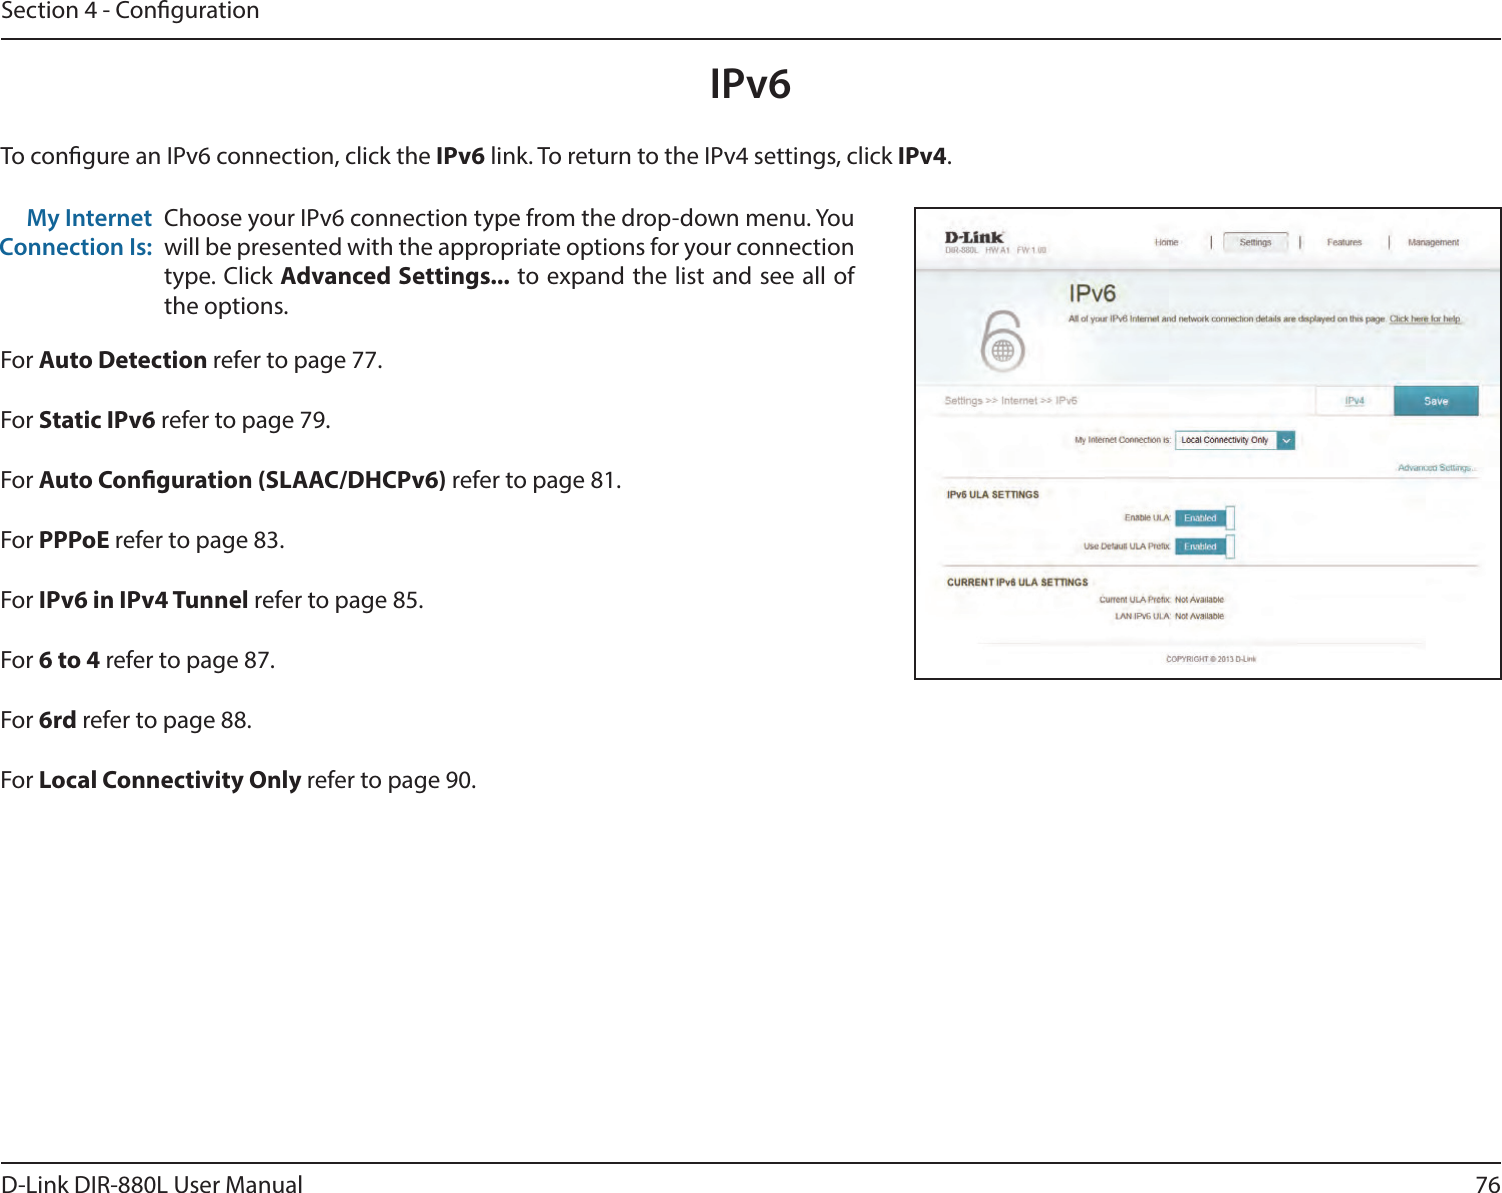 76D-Link DIR-880L User ManualSection 4 - CongurationIPv6To congure an IPv6 connection, click the IPv6 link. To return to the IPv4 settings, click IPv4.Choose your IPv6 connection type from the drop-down menu. You will be presented with the appropriate options for your connection type. Click Advanced Settings... to expand the list and see all of the options.My Internet Connection Is:For Auto Detection refer to page 77.For Static IPv6 refer to page 79.For Auto Conguration (SLAAC/DHCPv6) refer to page 81.For PPPoE refer to page 83.For IPv6 in IPv4 Tunnel refer to page 85.For 6 to 4 refer to page 87.For 6rd refer to page 88.For Local Connectivity Only refer to page 90.